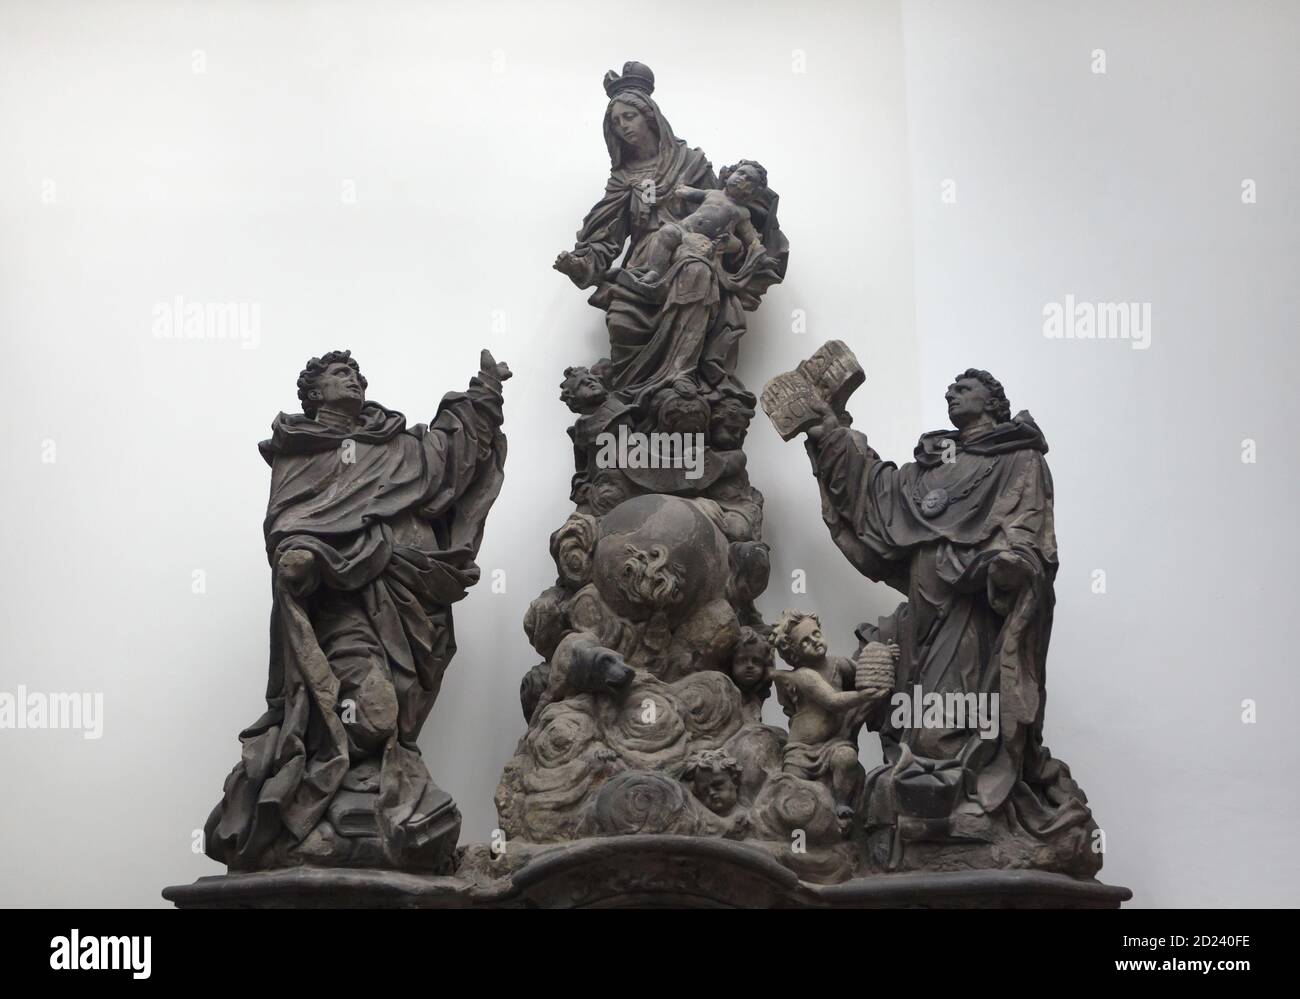 Original statue of Madonna with Saint Dominic and Saint Thomas Aquinas by Lusatian Baroque sculptor Matěj Václav Jäckel (1708) once placed on the Charles Bridge in Prague, now on display in the Lapidarium of the National Museum (Lapidárium Národního muzea) in Prague, Czech Republic. Stock Photo